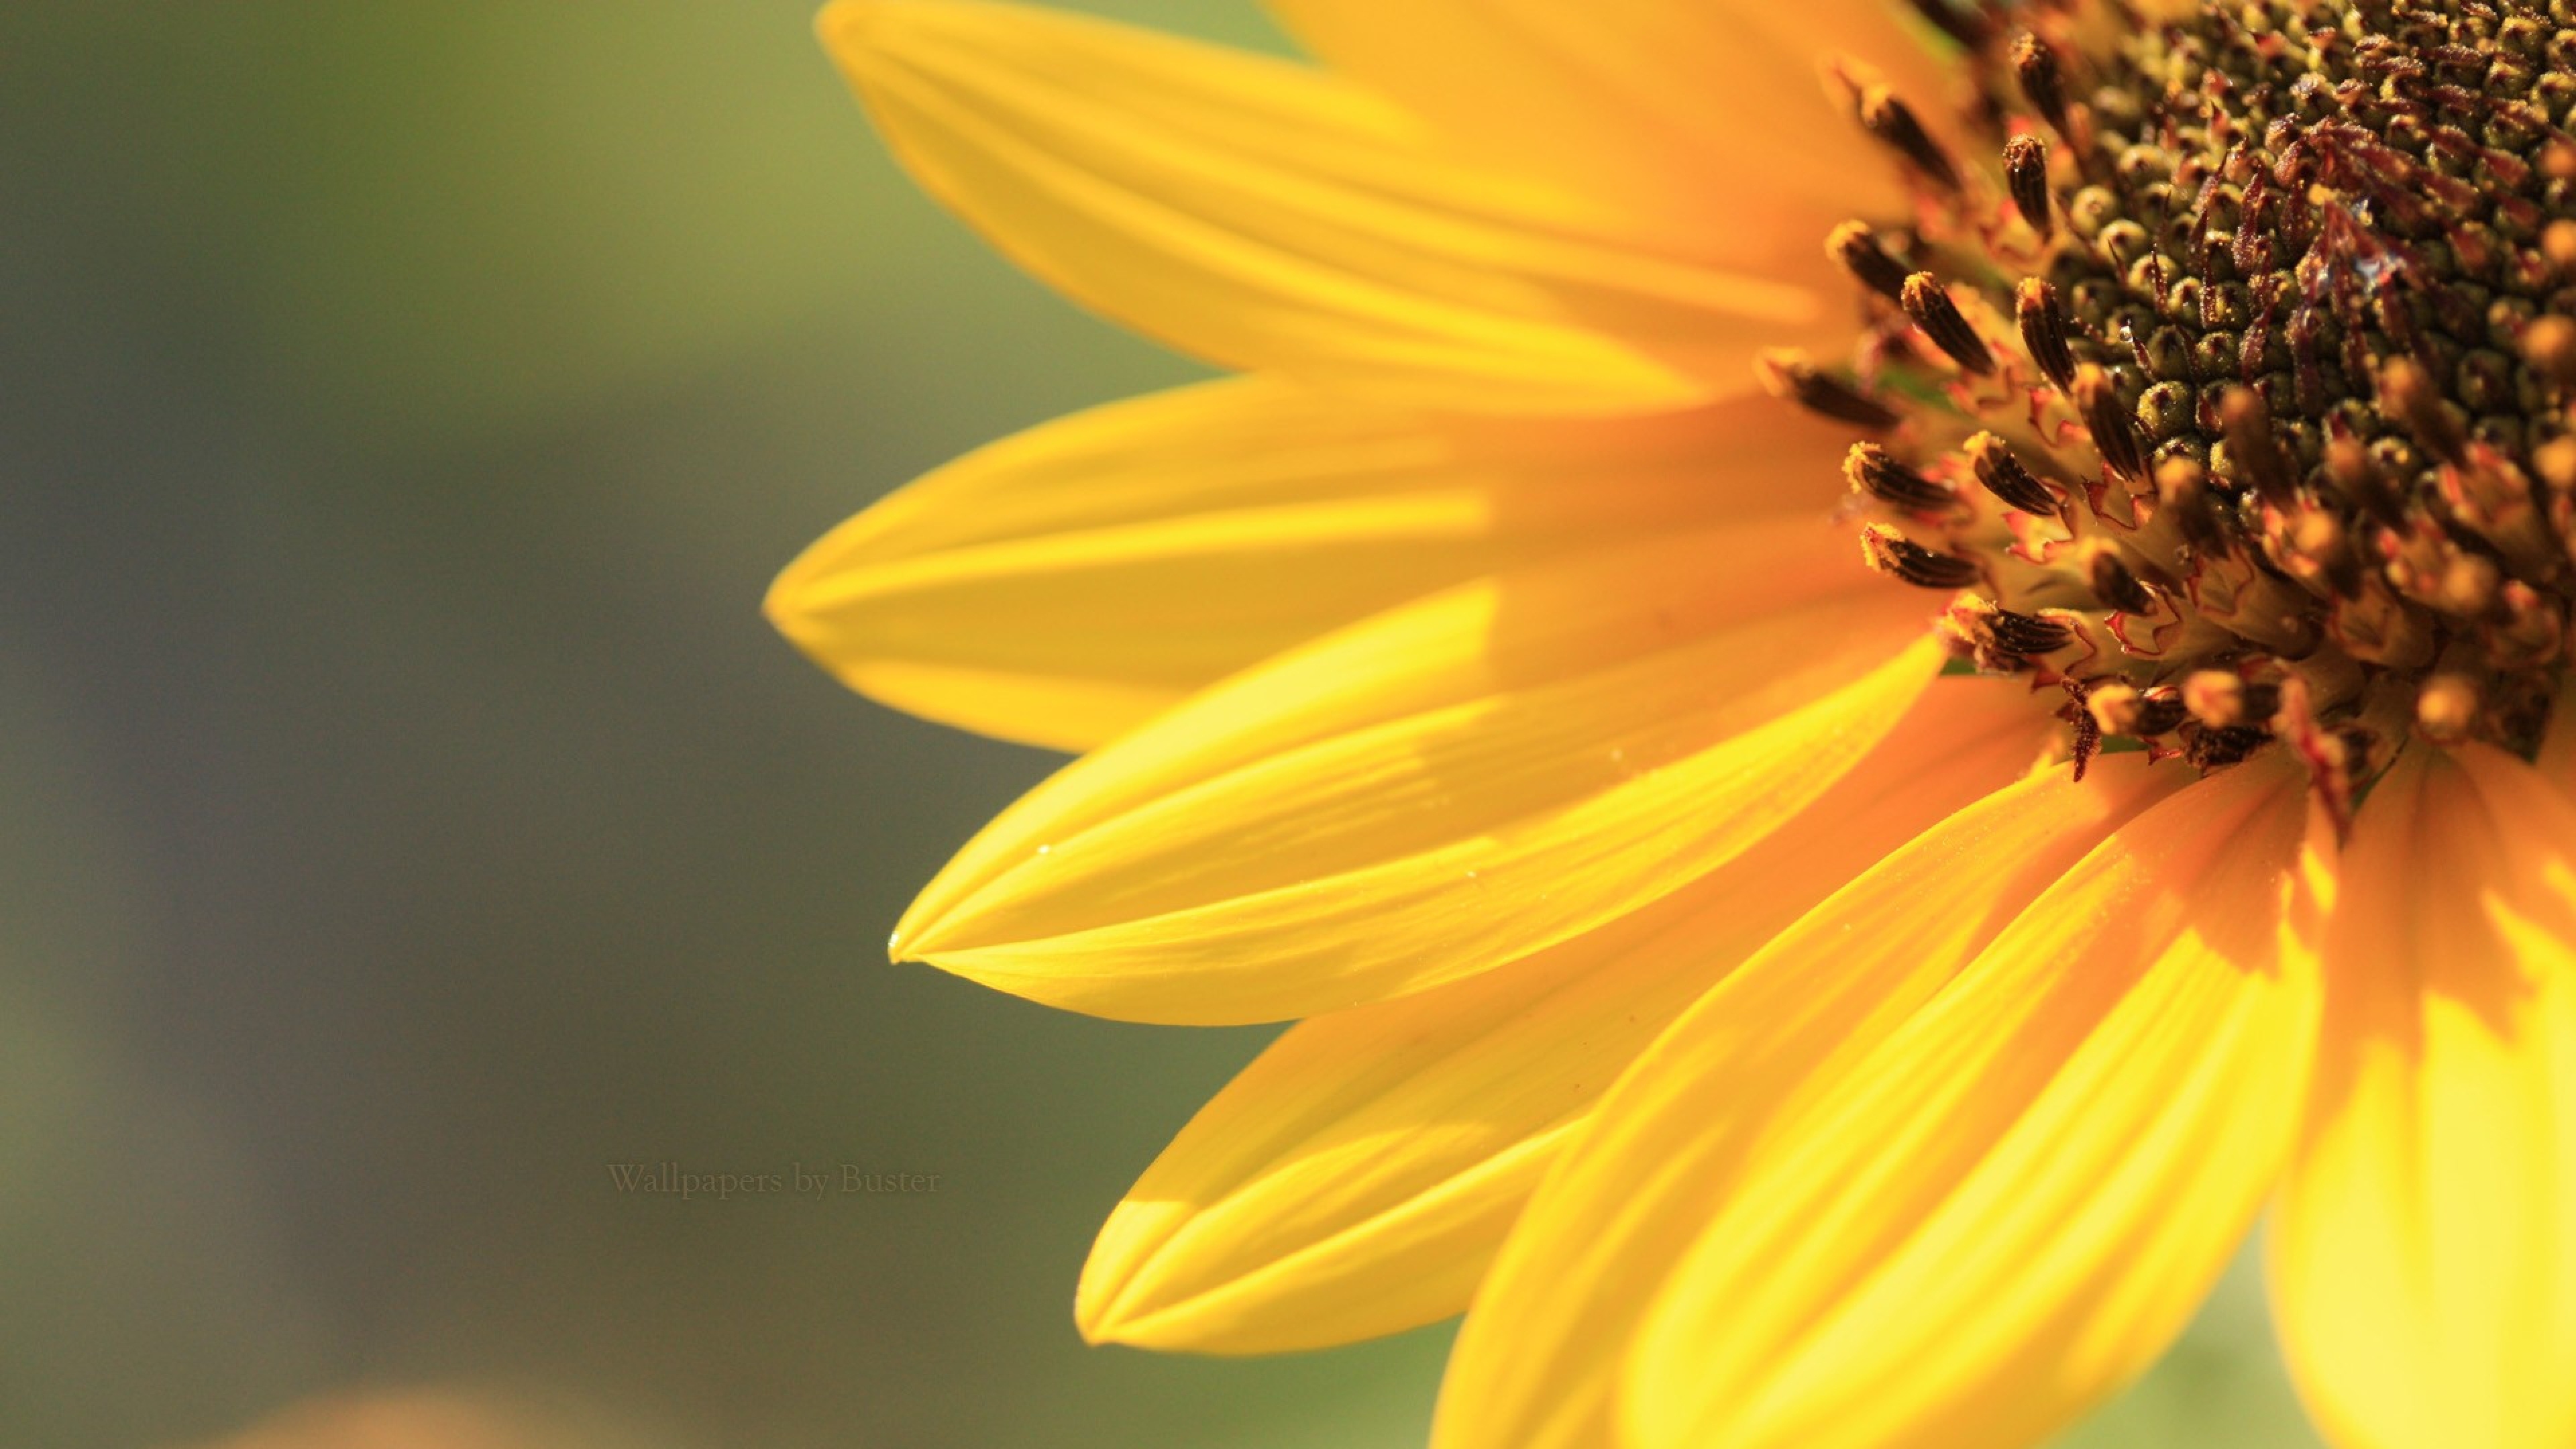 Sunflower background pictures